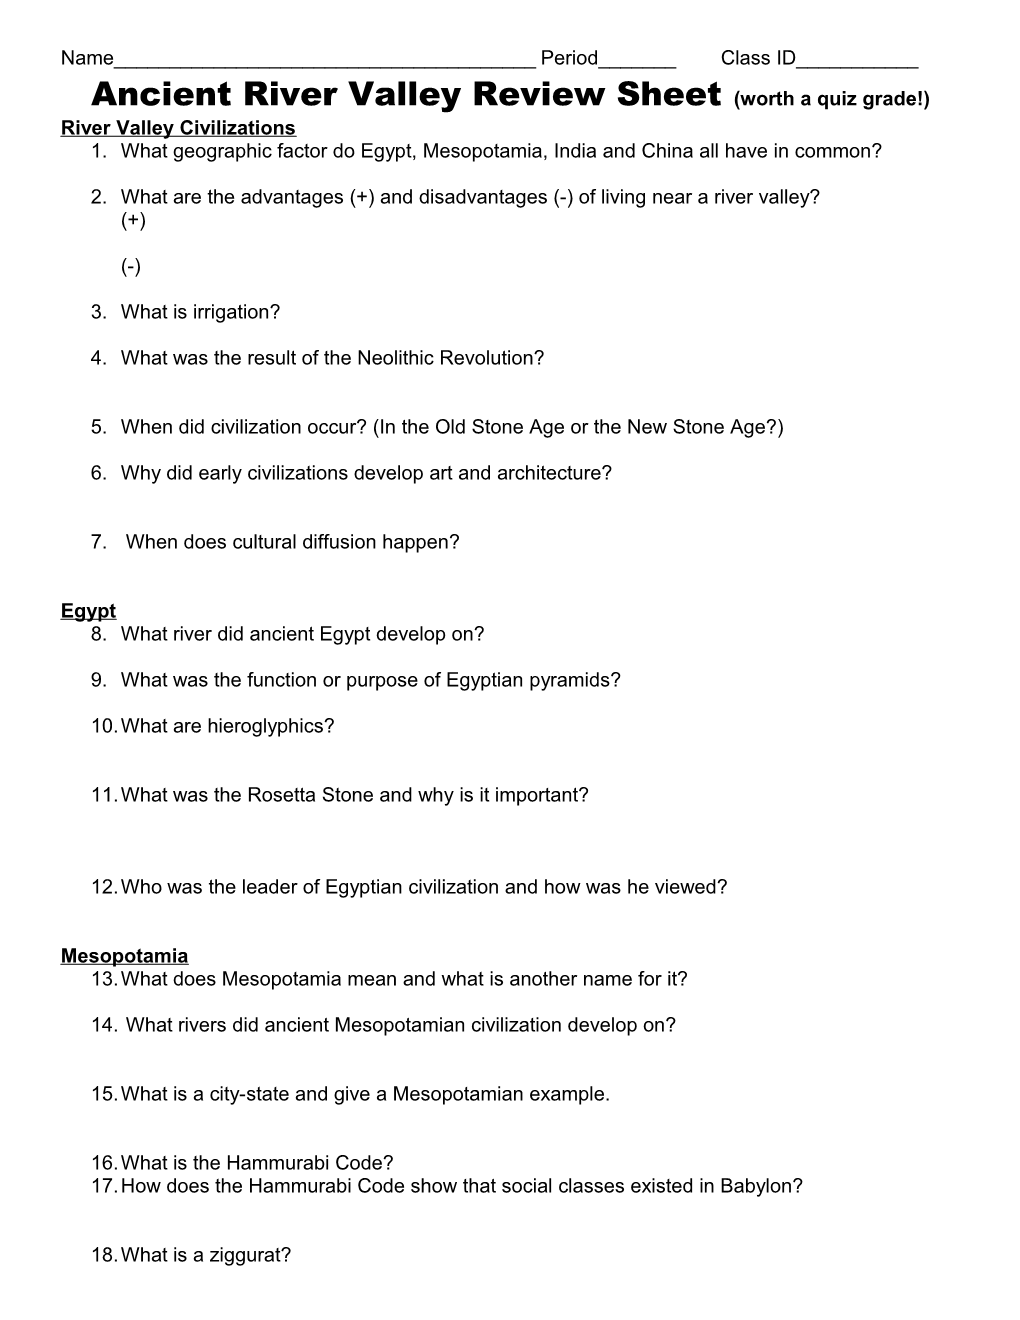 Ancient River Valley Review Sheet (Worth a Quiz Grade!) s1